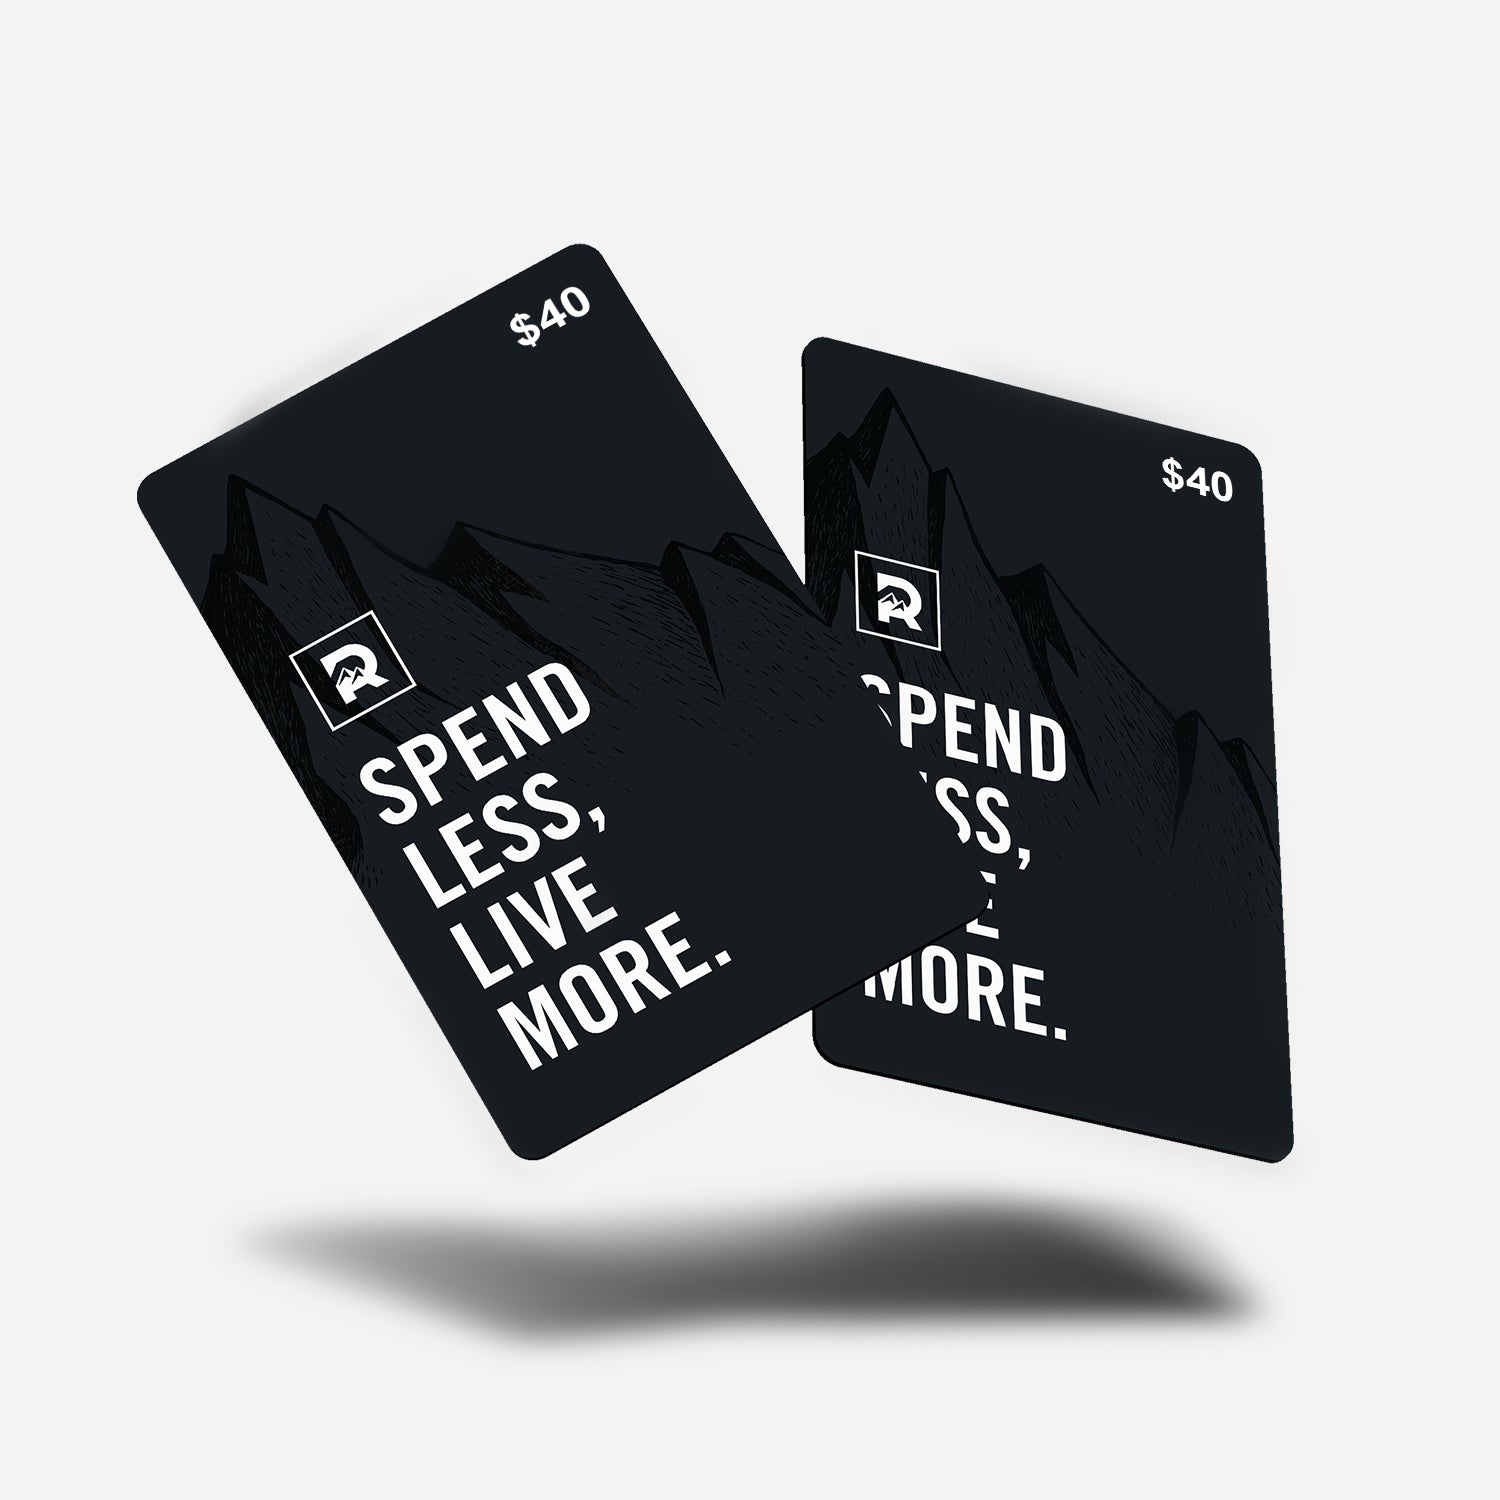 Big Night Live on X: 💸 This Black Friday, purchase one gift card